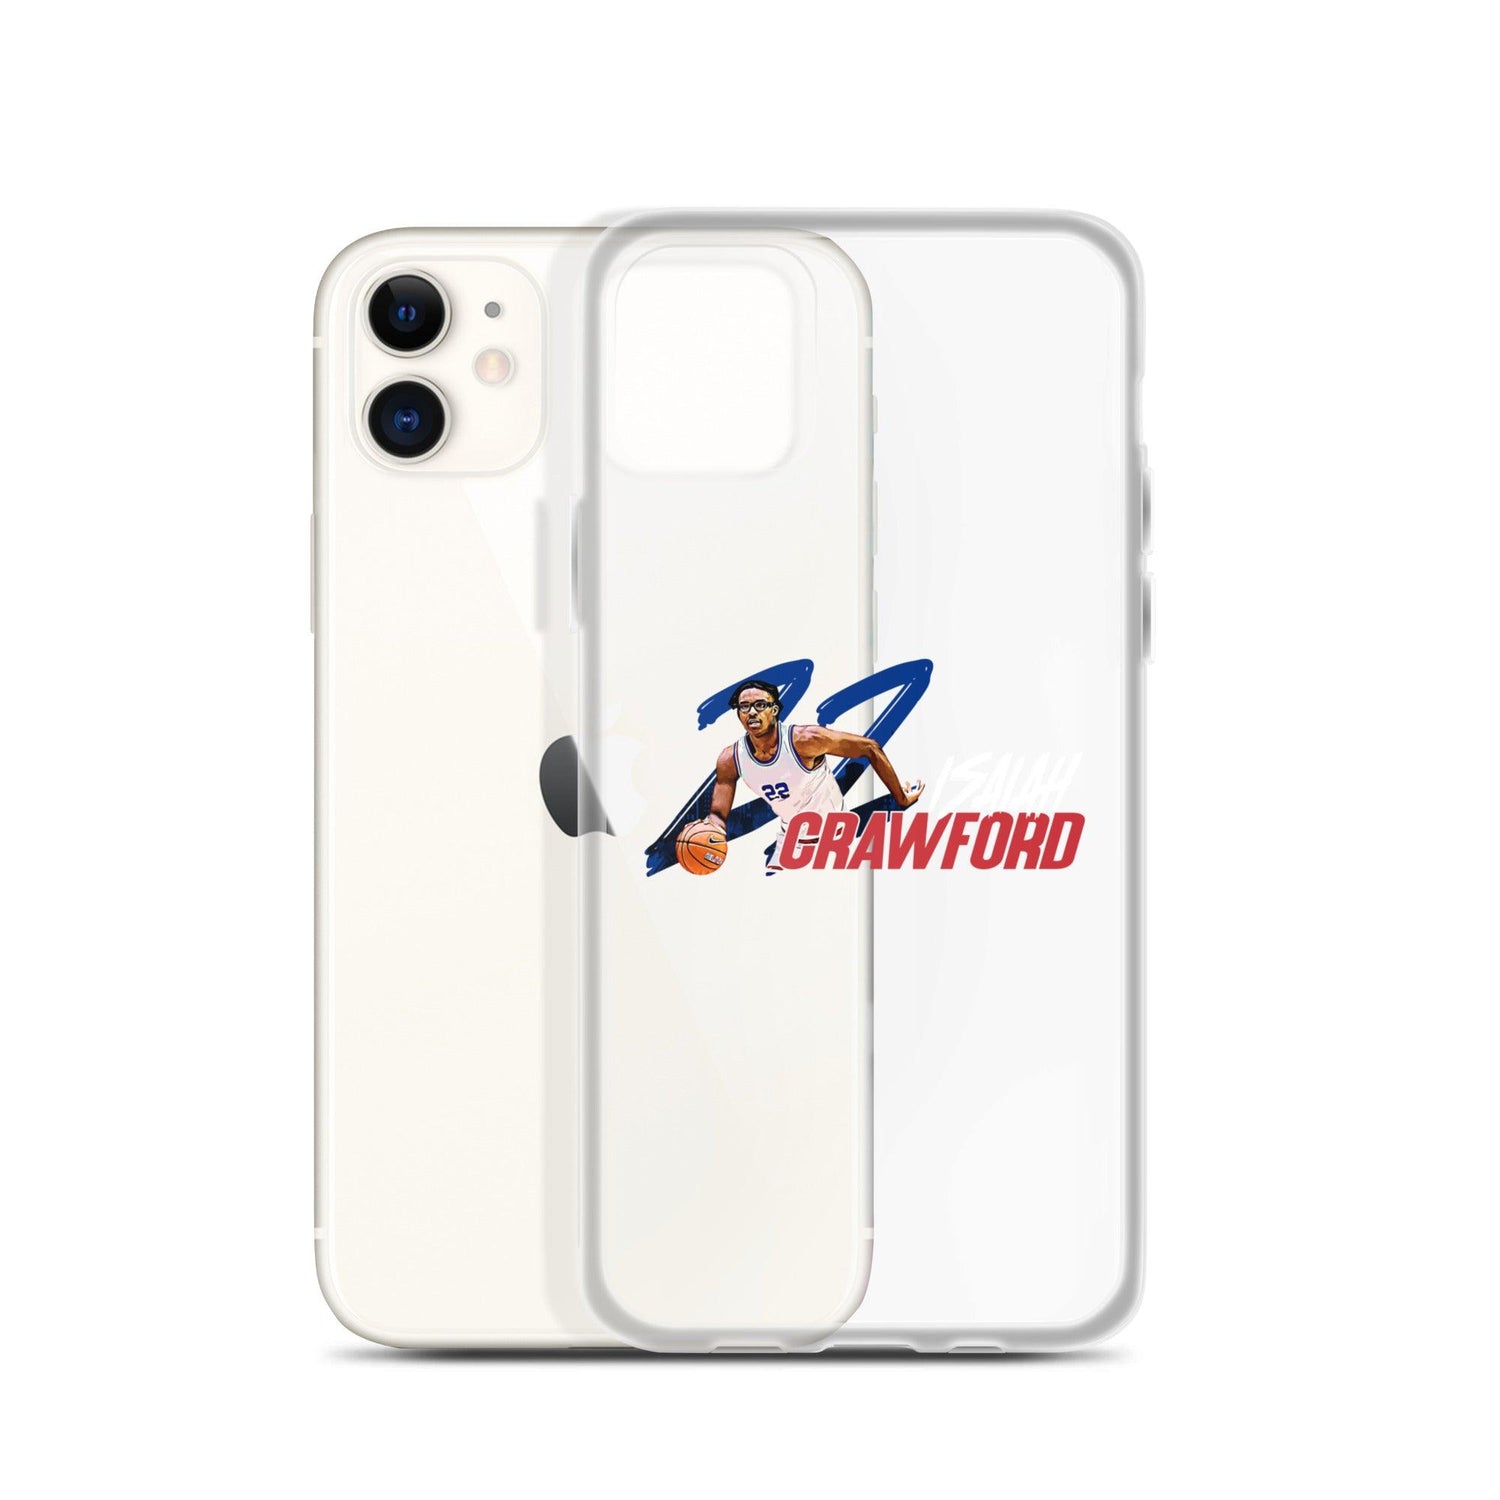 Isaiah Crawford "Gameday" iPhone Case - Fan Arch